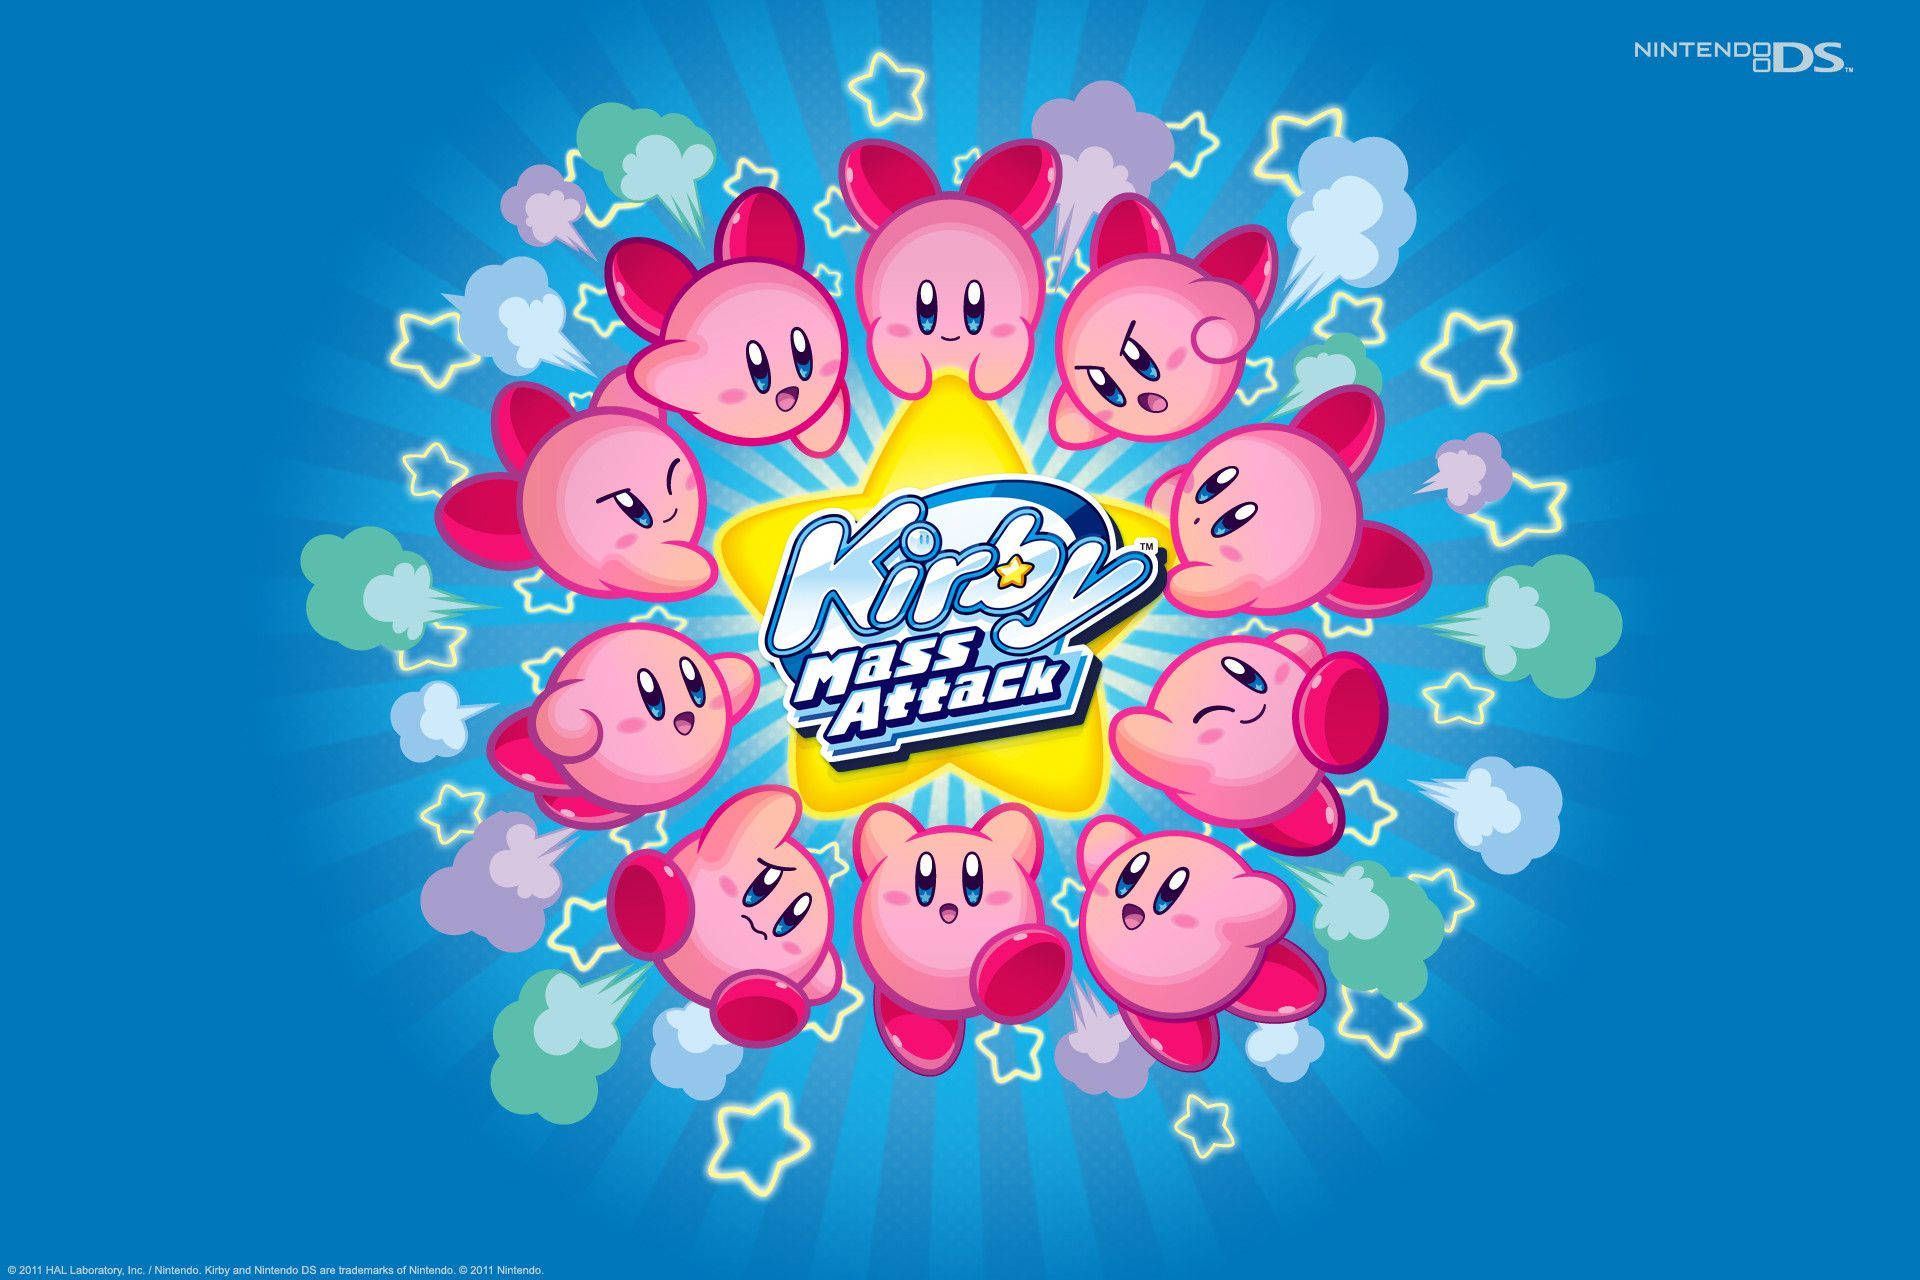 Kirby Mass Attack wallpaper with the pink character surrounded by pink copy ability allies - Nintendo